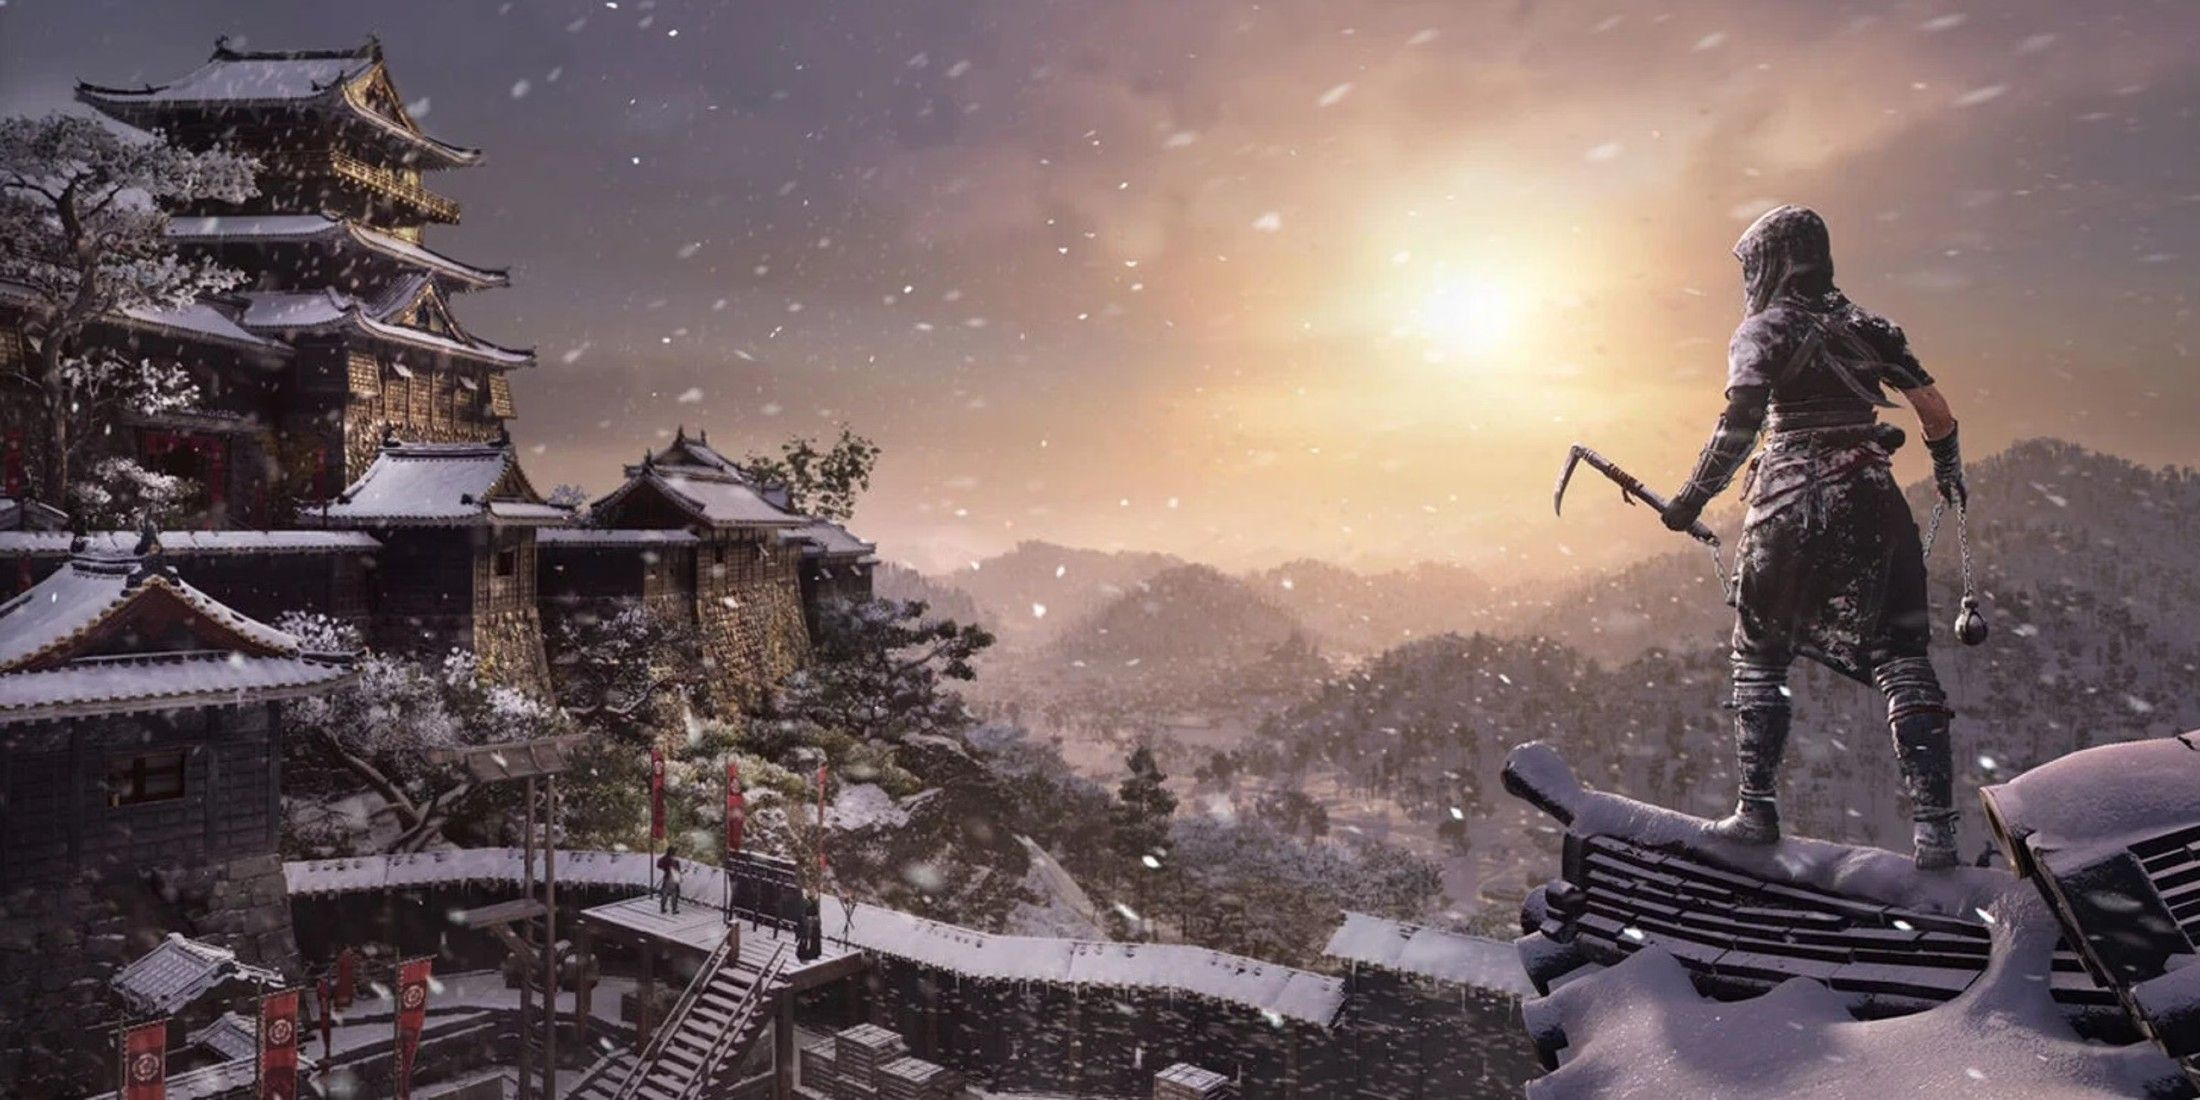 assassins creed shadows naoe on a snowy rooftop